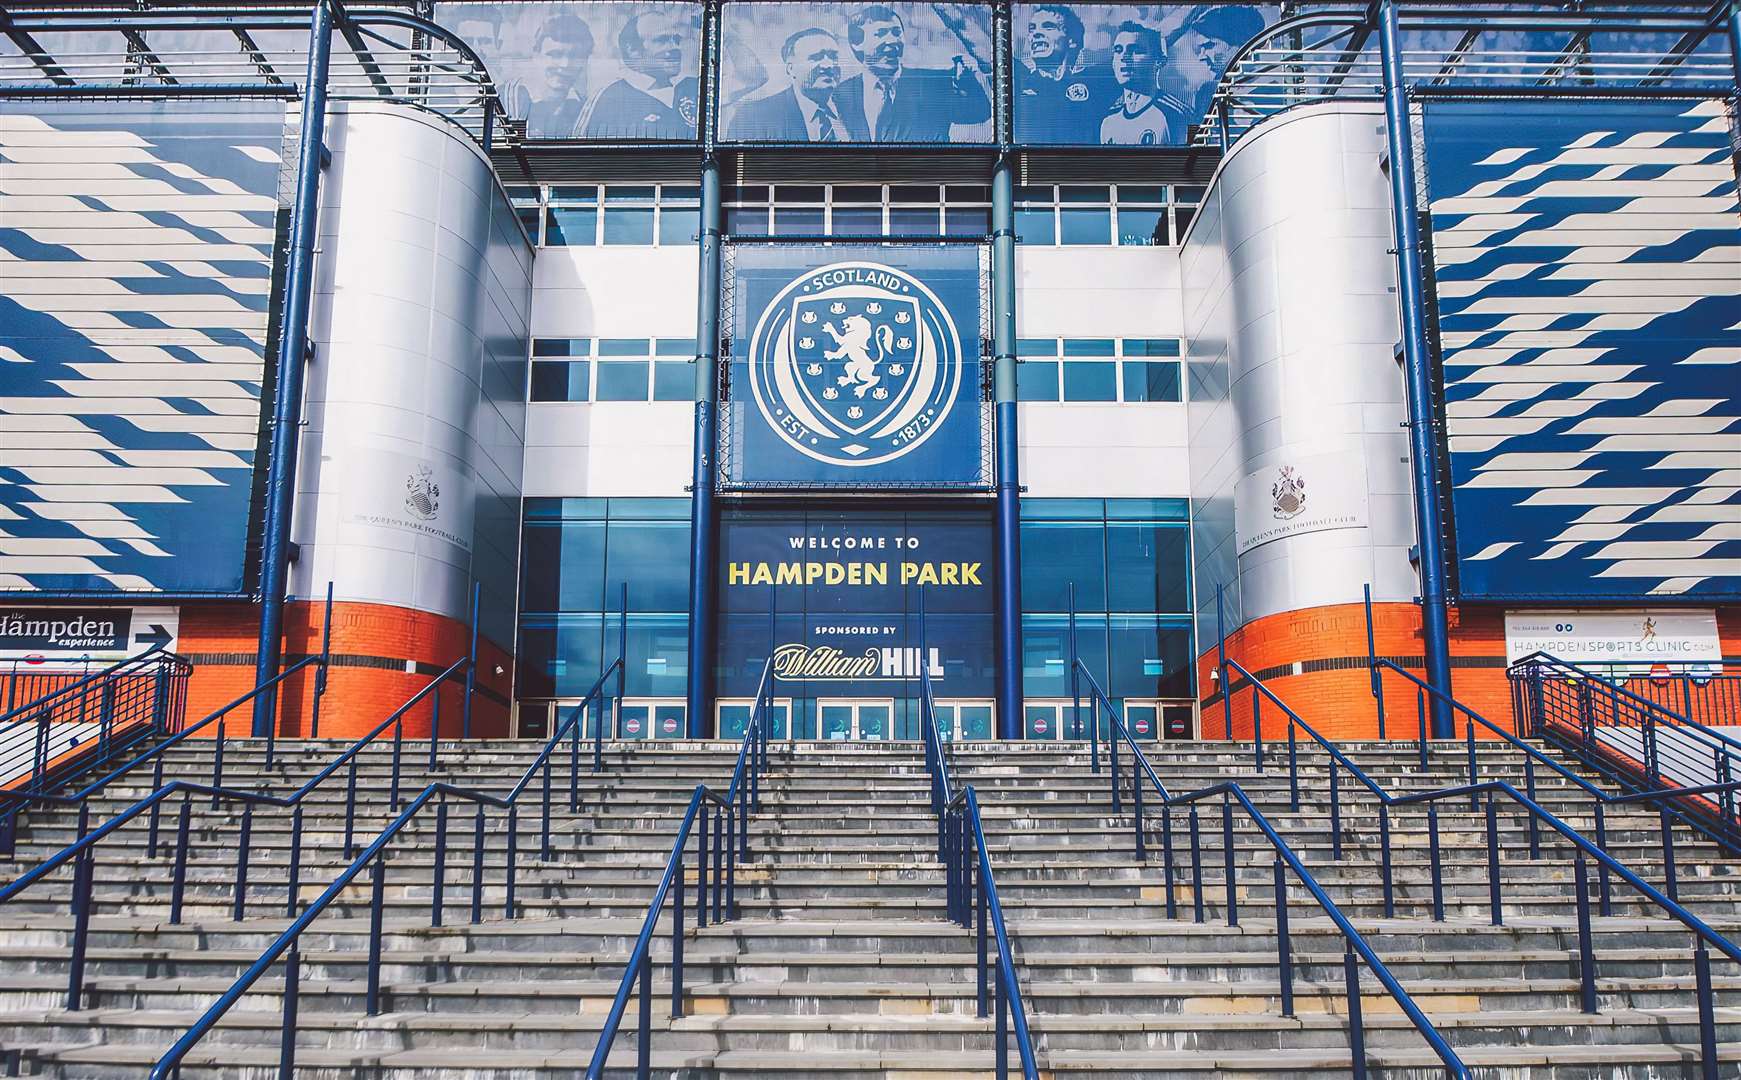 Ukraine will visit Hampden in the World Cup play-off semi-final.